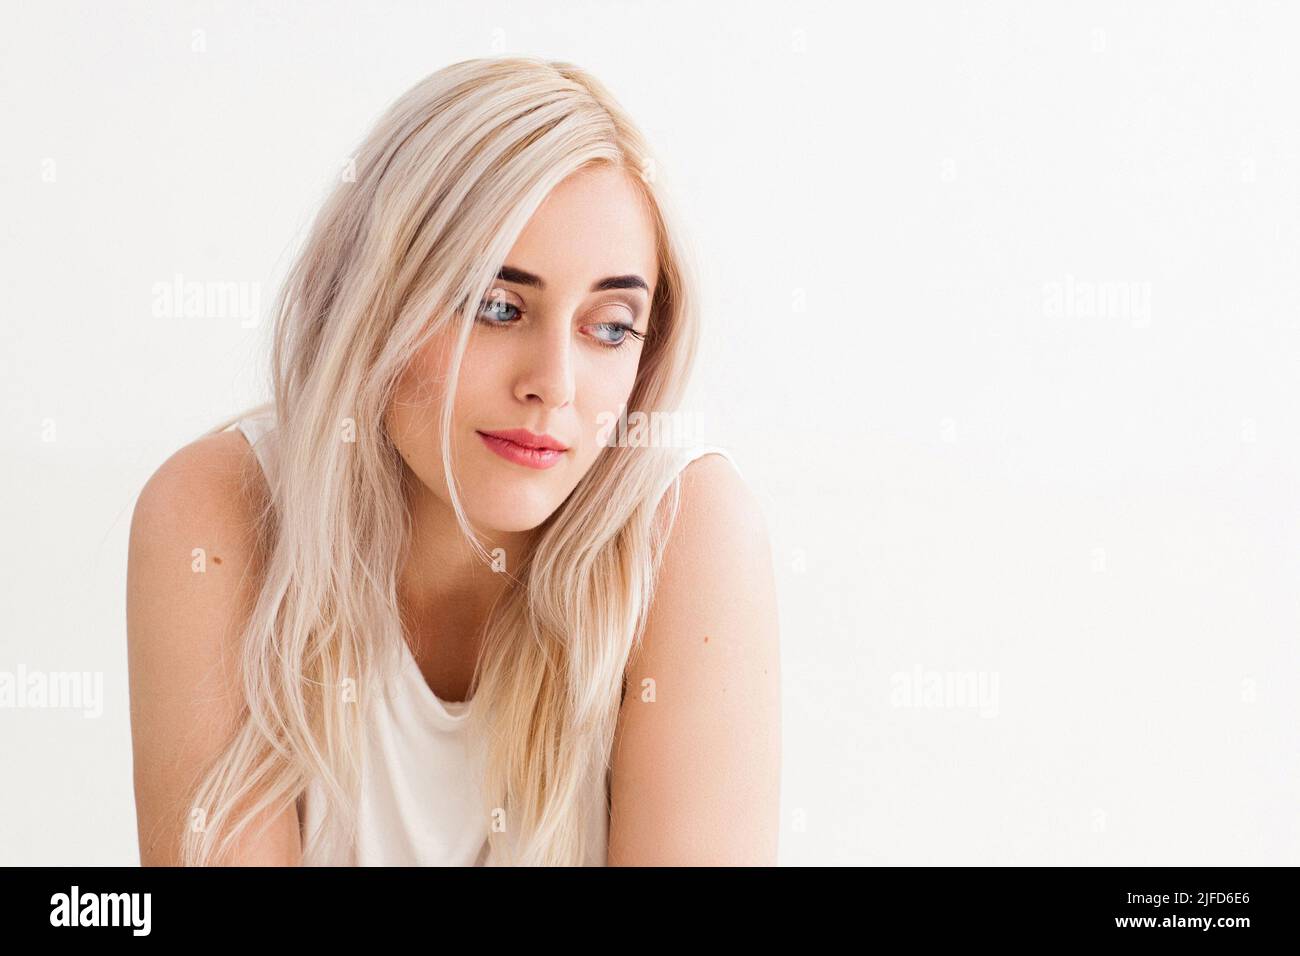 Portrait of young woman with contempt emotions Stock Photo